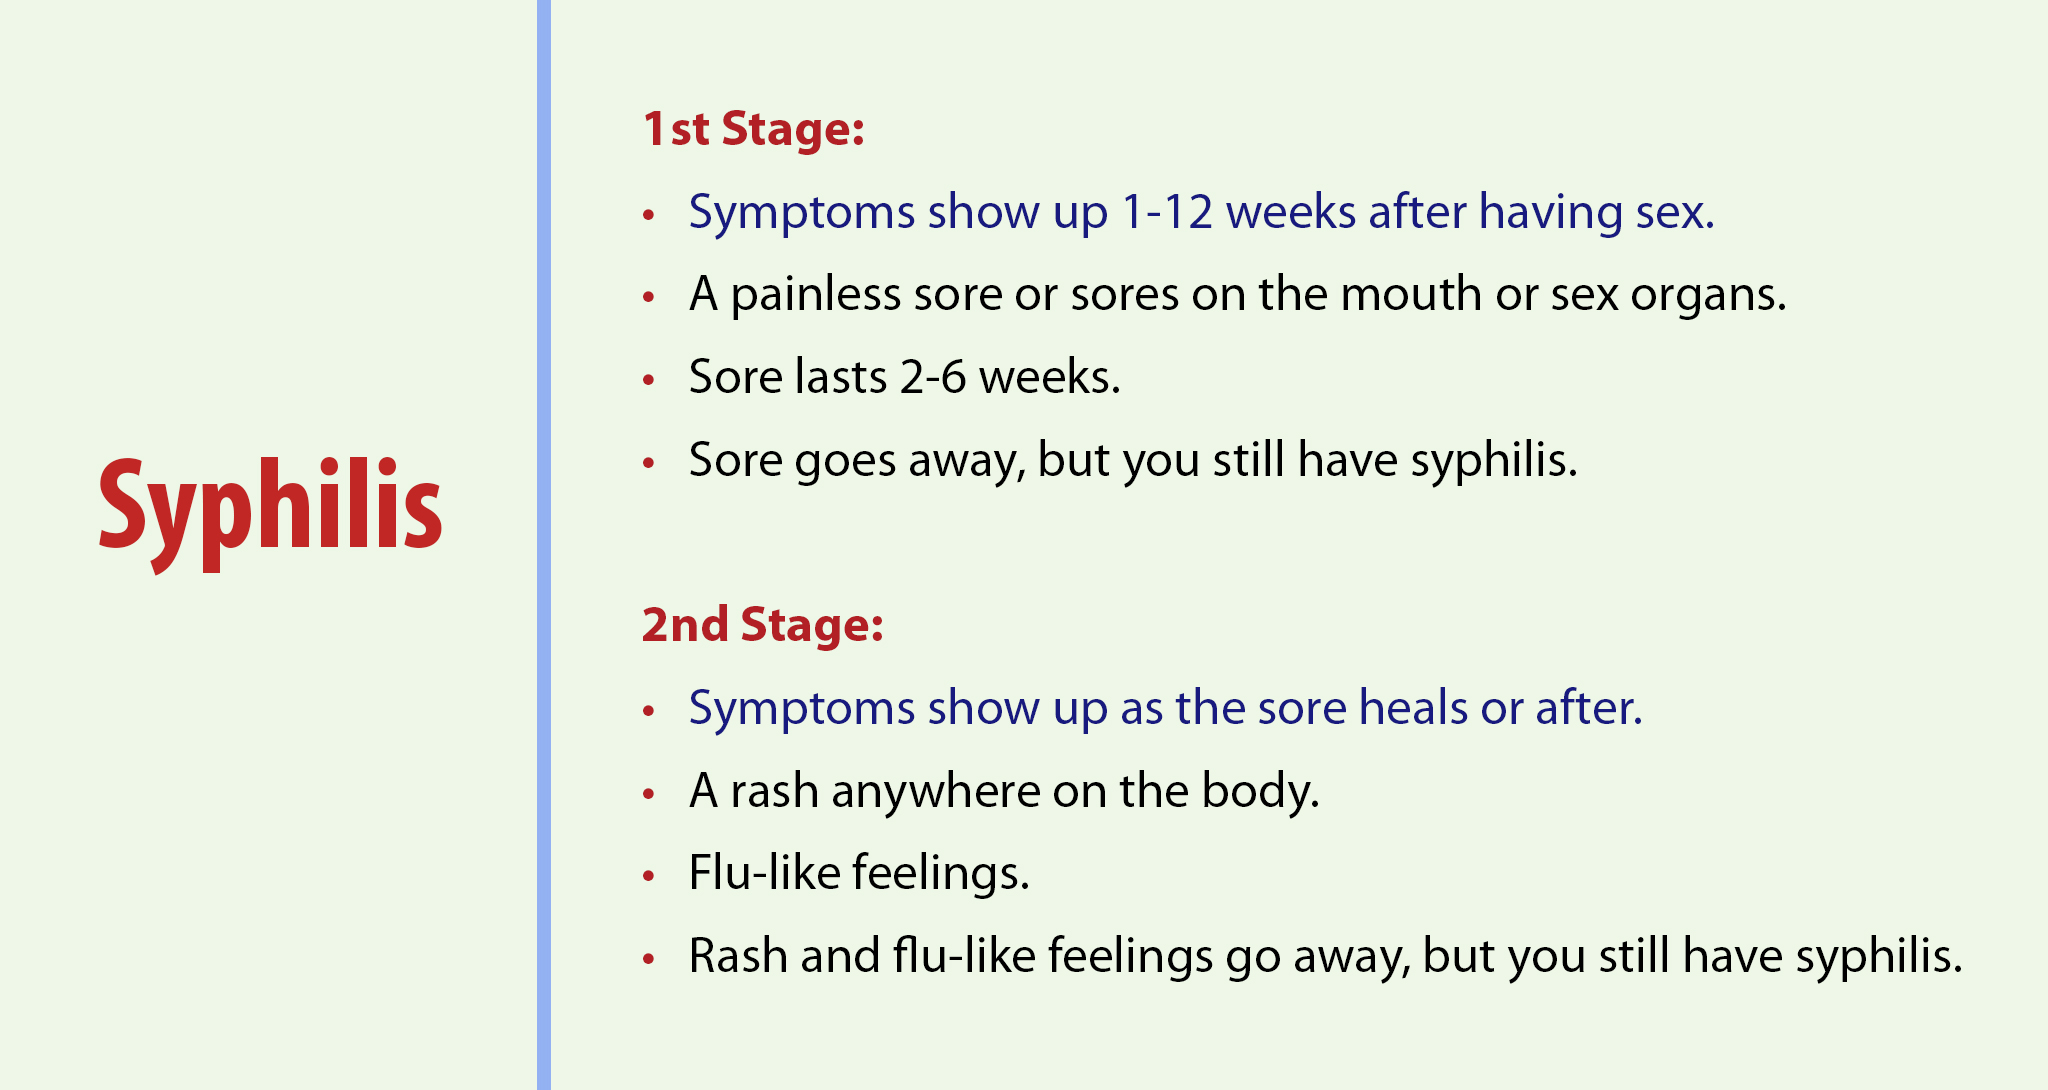 Syphilis has two stages